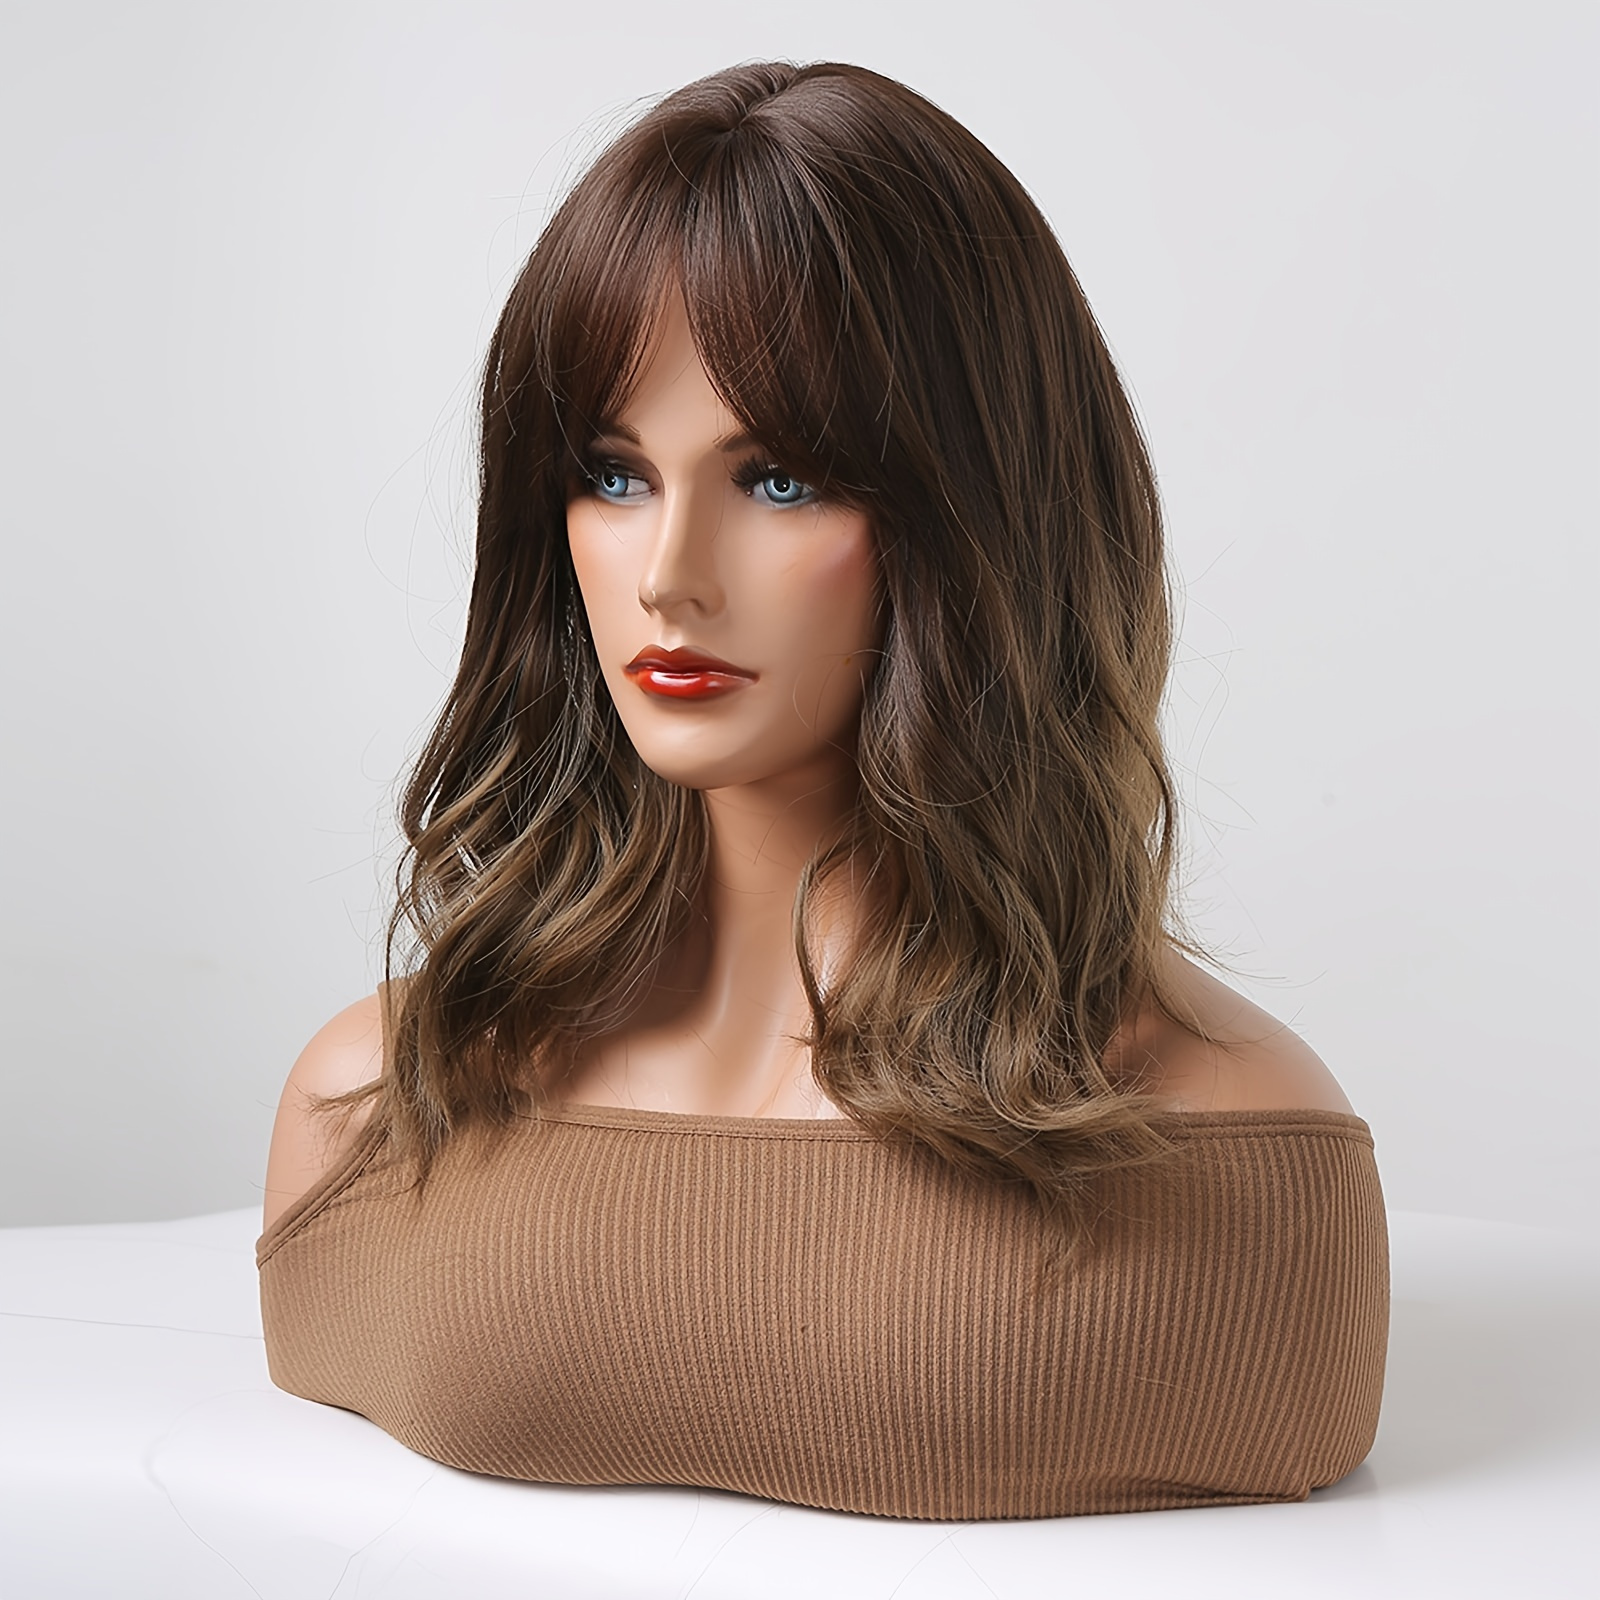 

Heat Resistant Short Brown Synthetic Wig With Middle Part For Women - Natural Looking And Comfortable